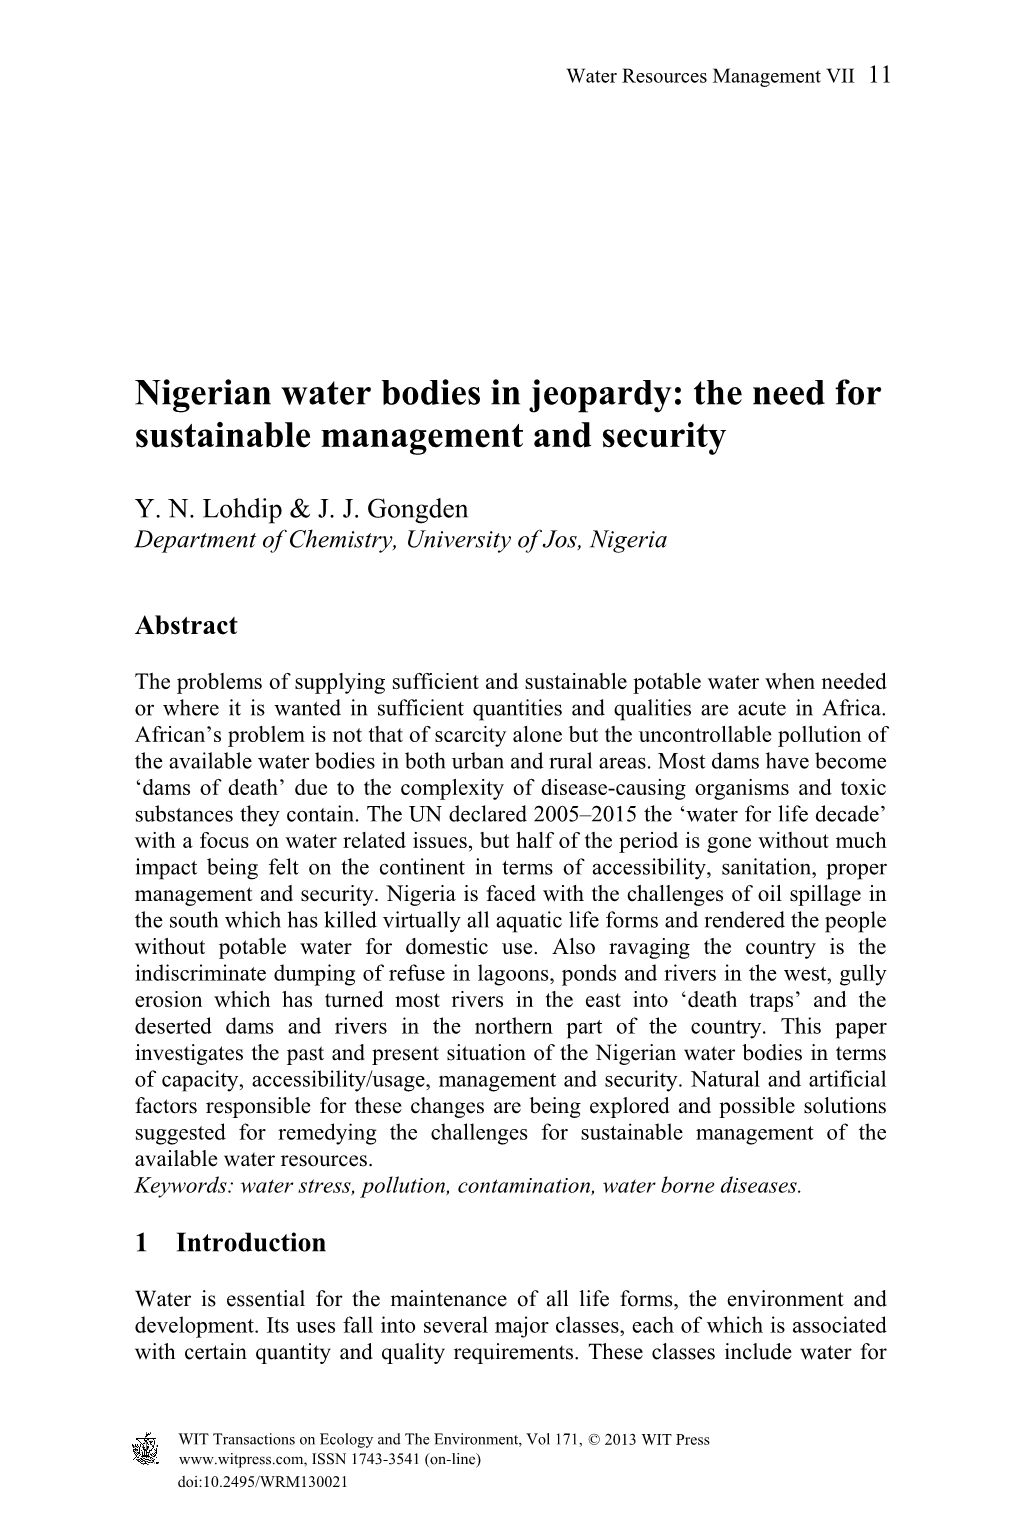 Nigerian Water Bodies in Jeopardy: the Need for Sustainable Management and Security